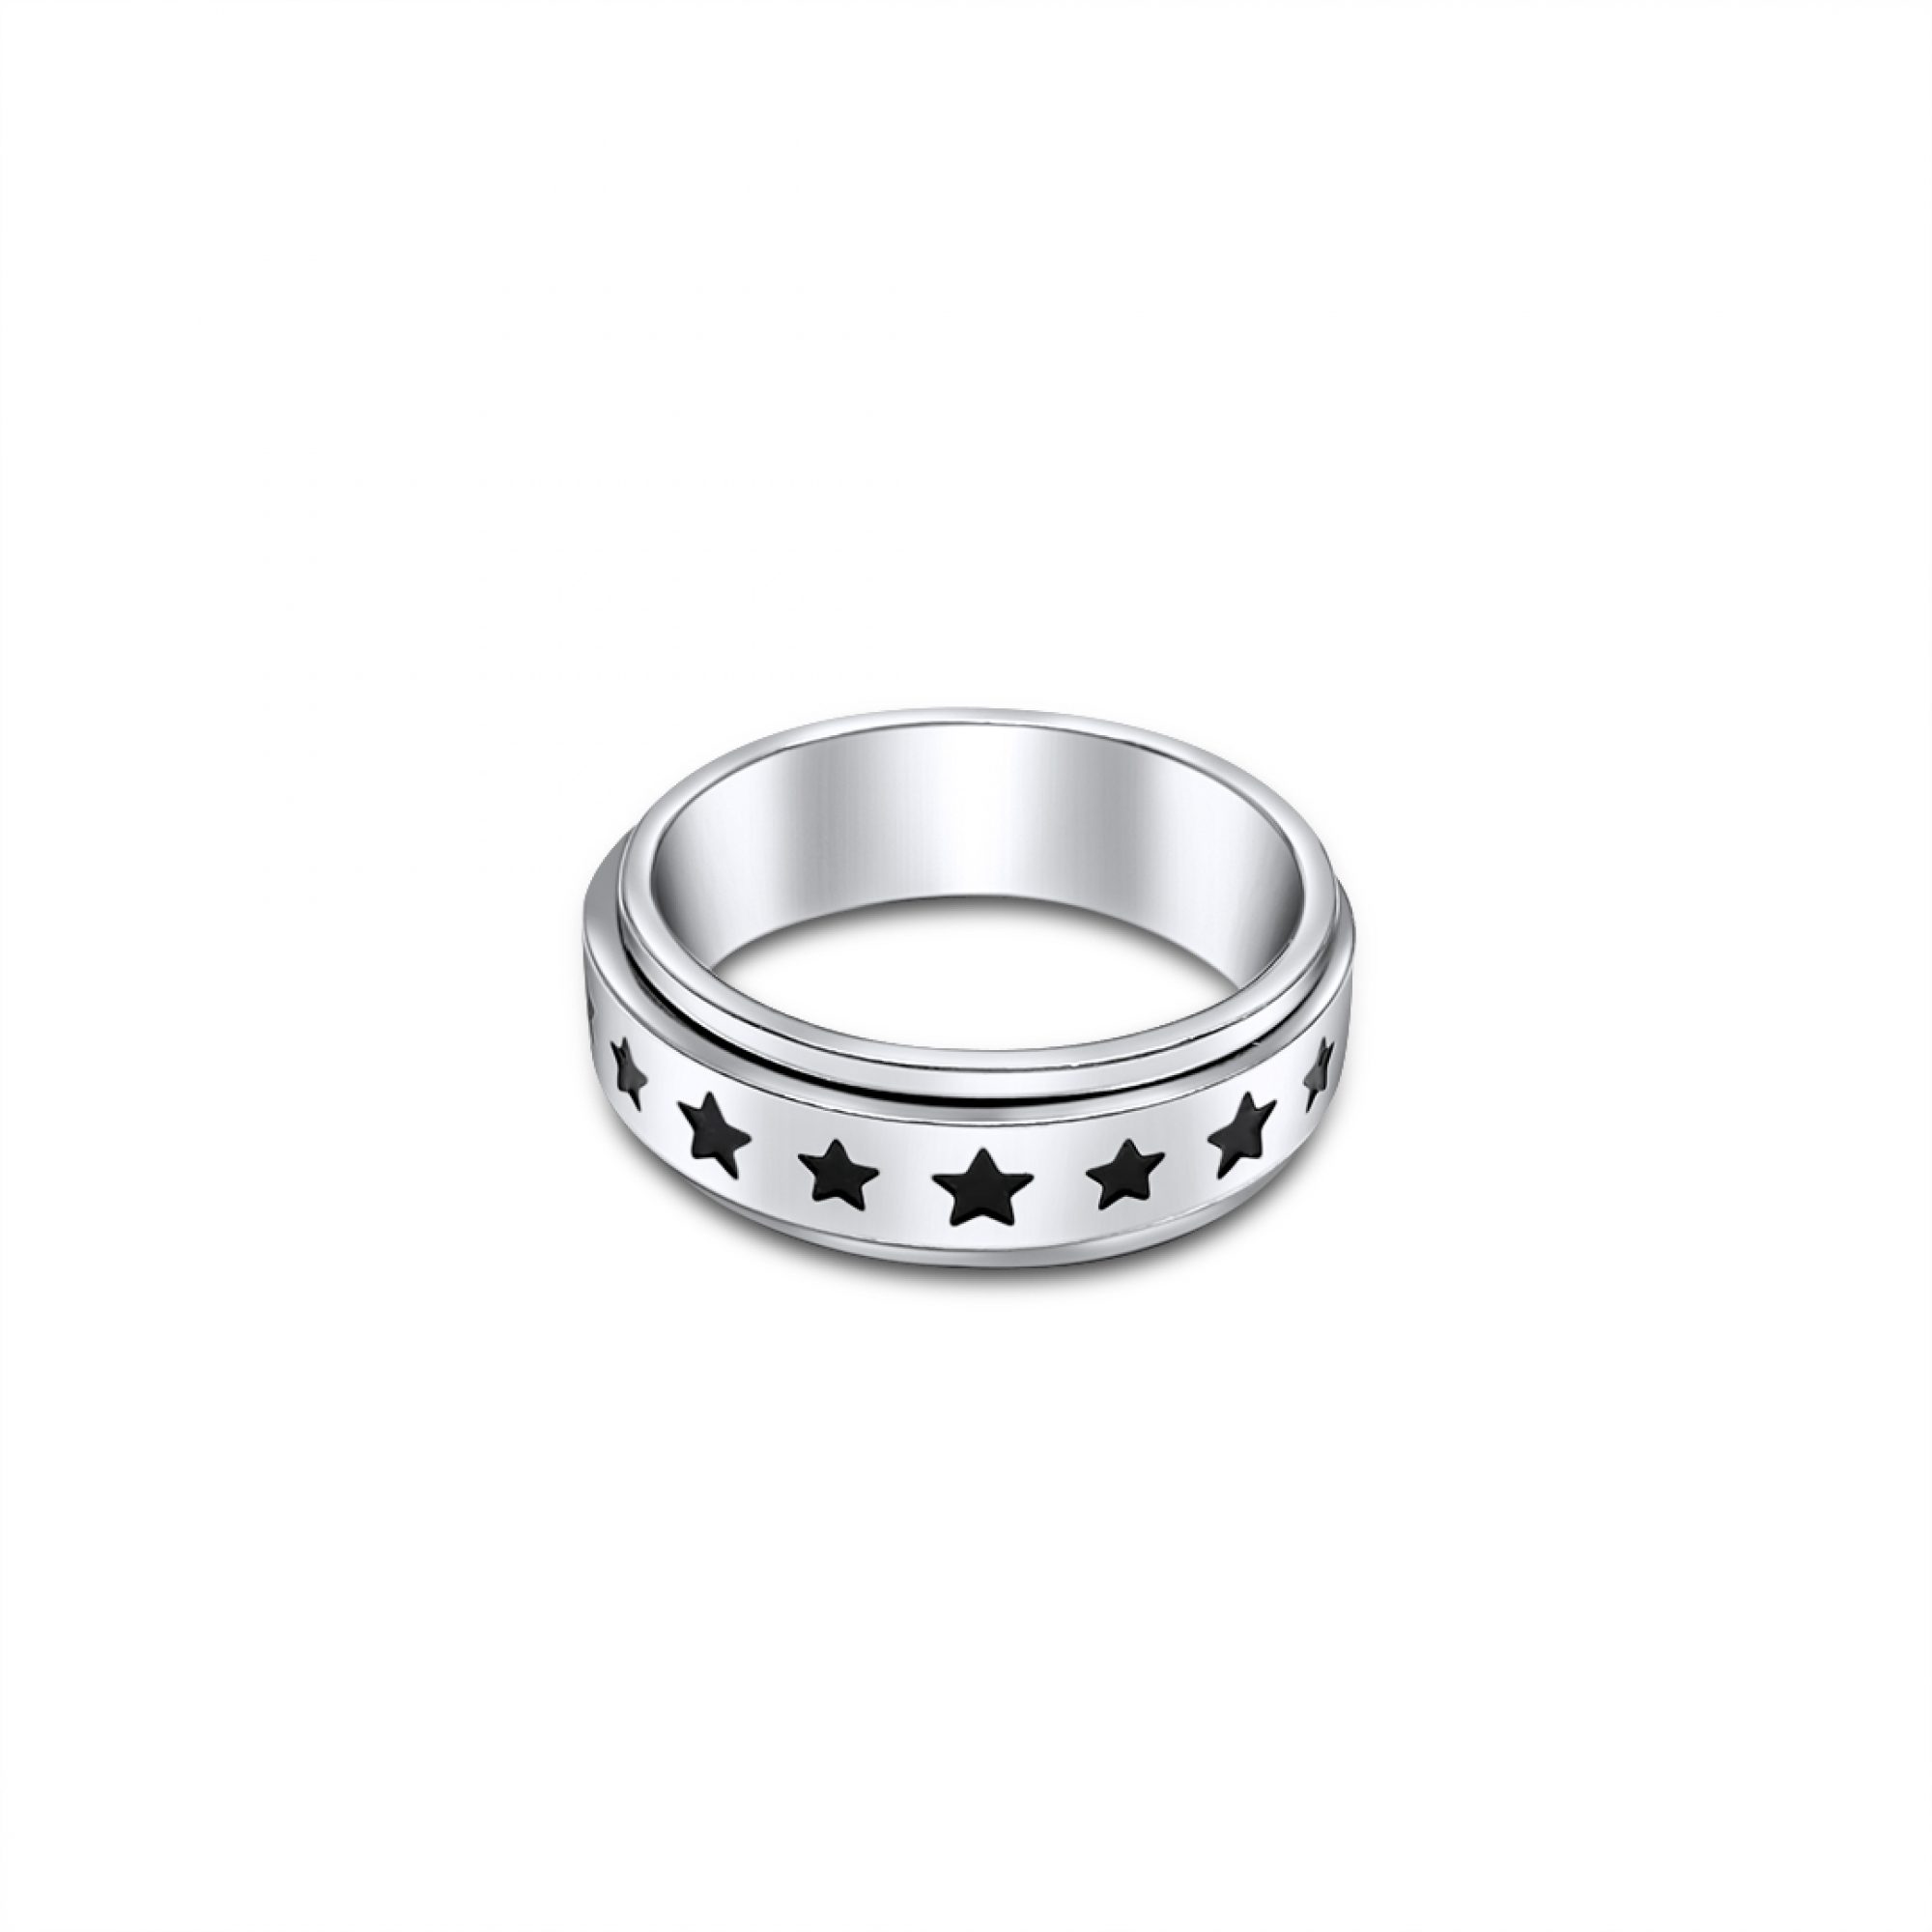 Steel ring with stars